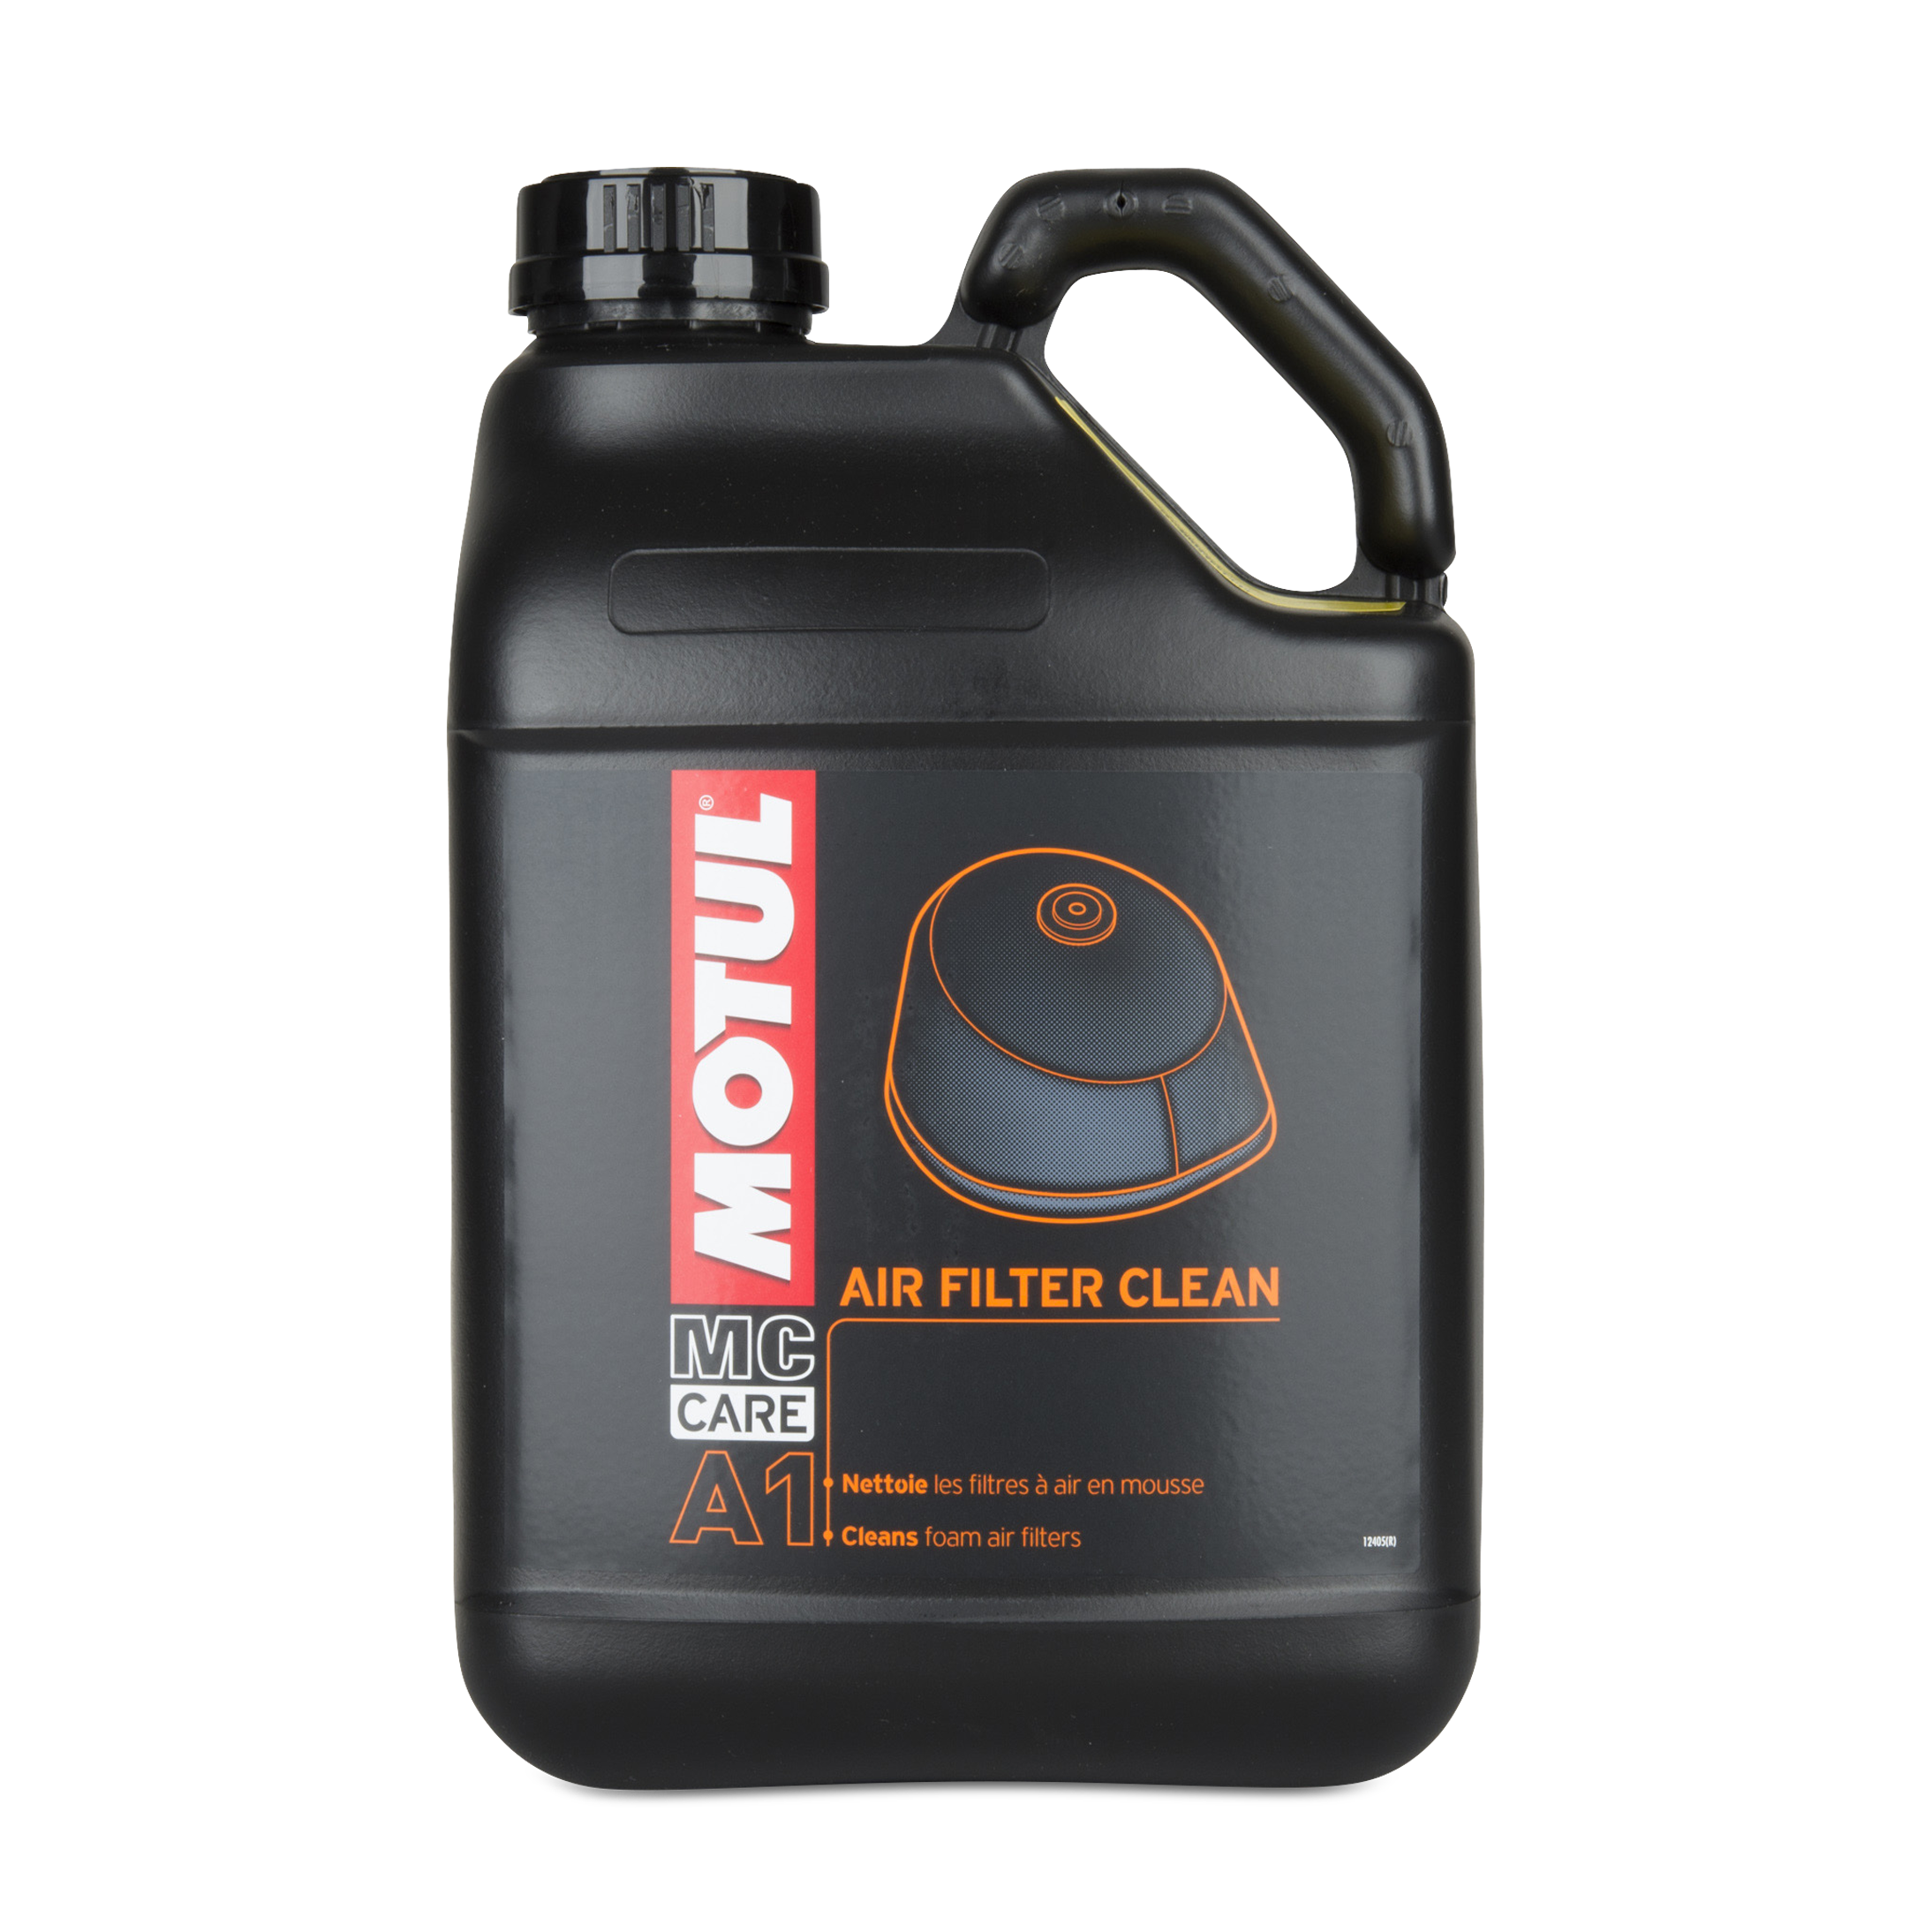 Motul A1 5L Cleaning Air Filter - Now 27% Savings